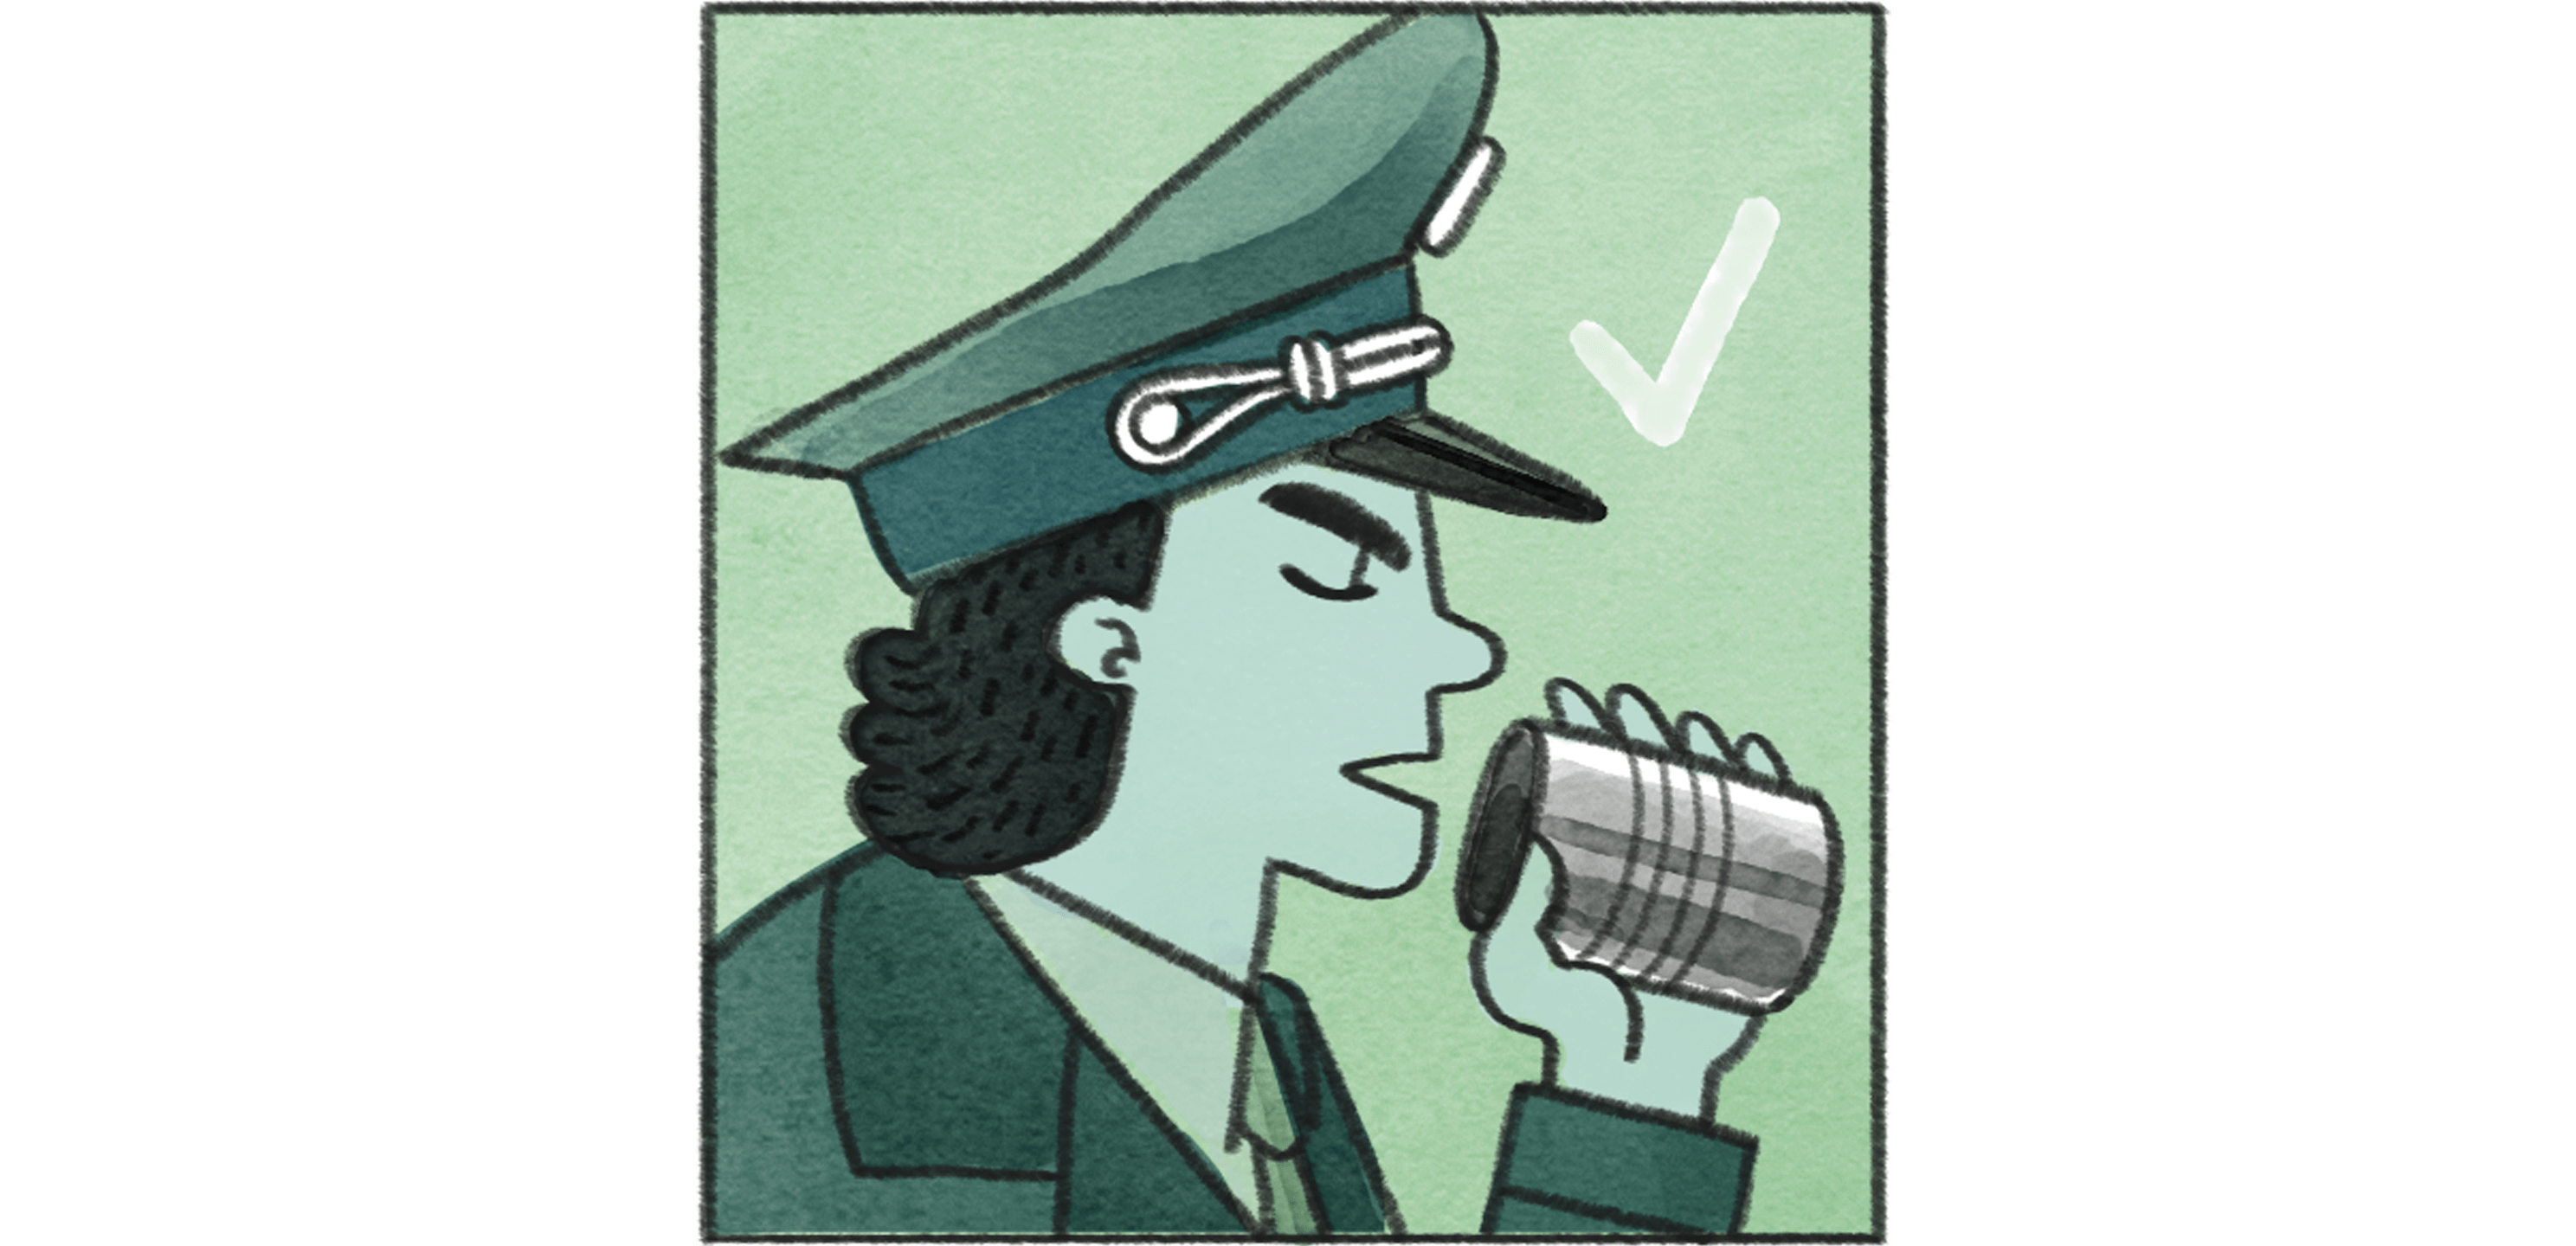 A cutout portion of the cover of the blog showing an official communicating through a metal can.